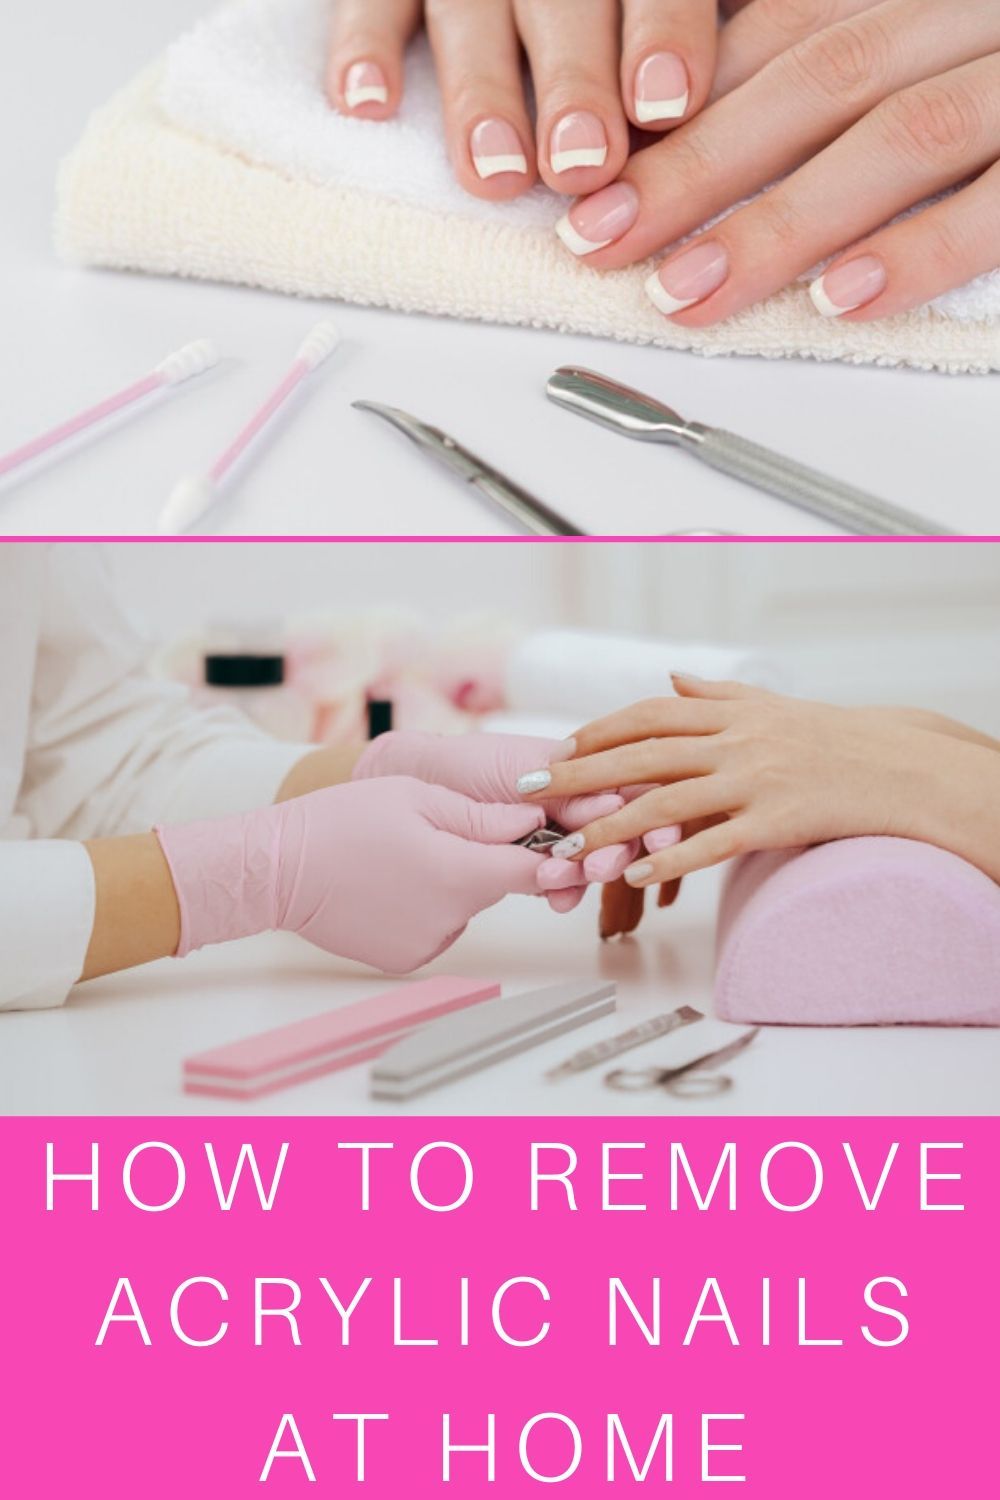 How much to remove acrylic nails